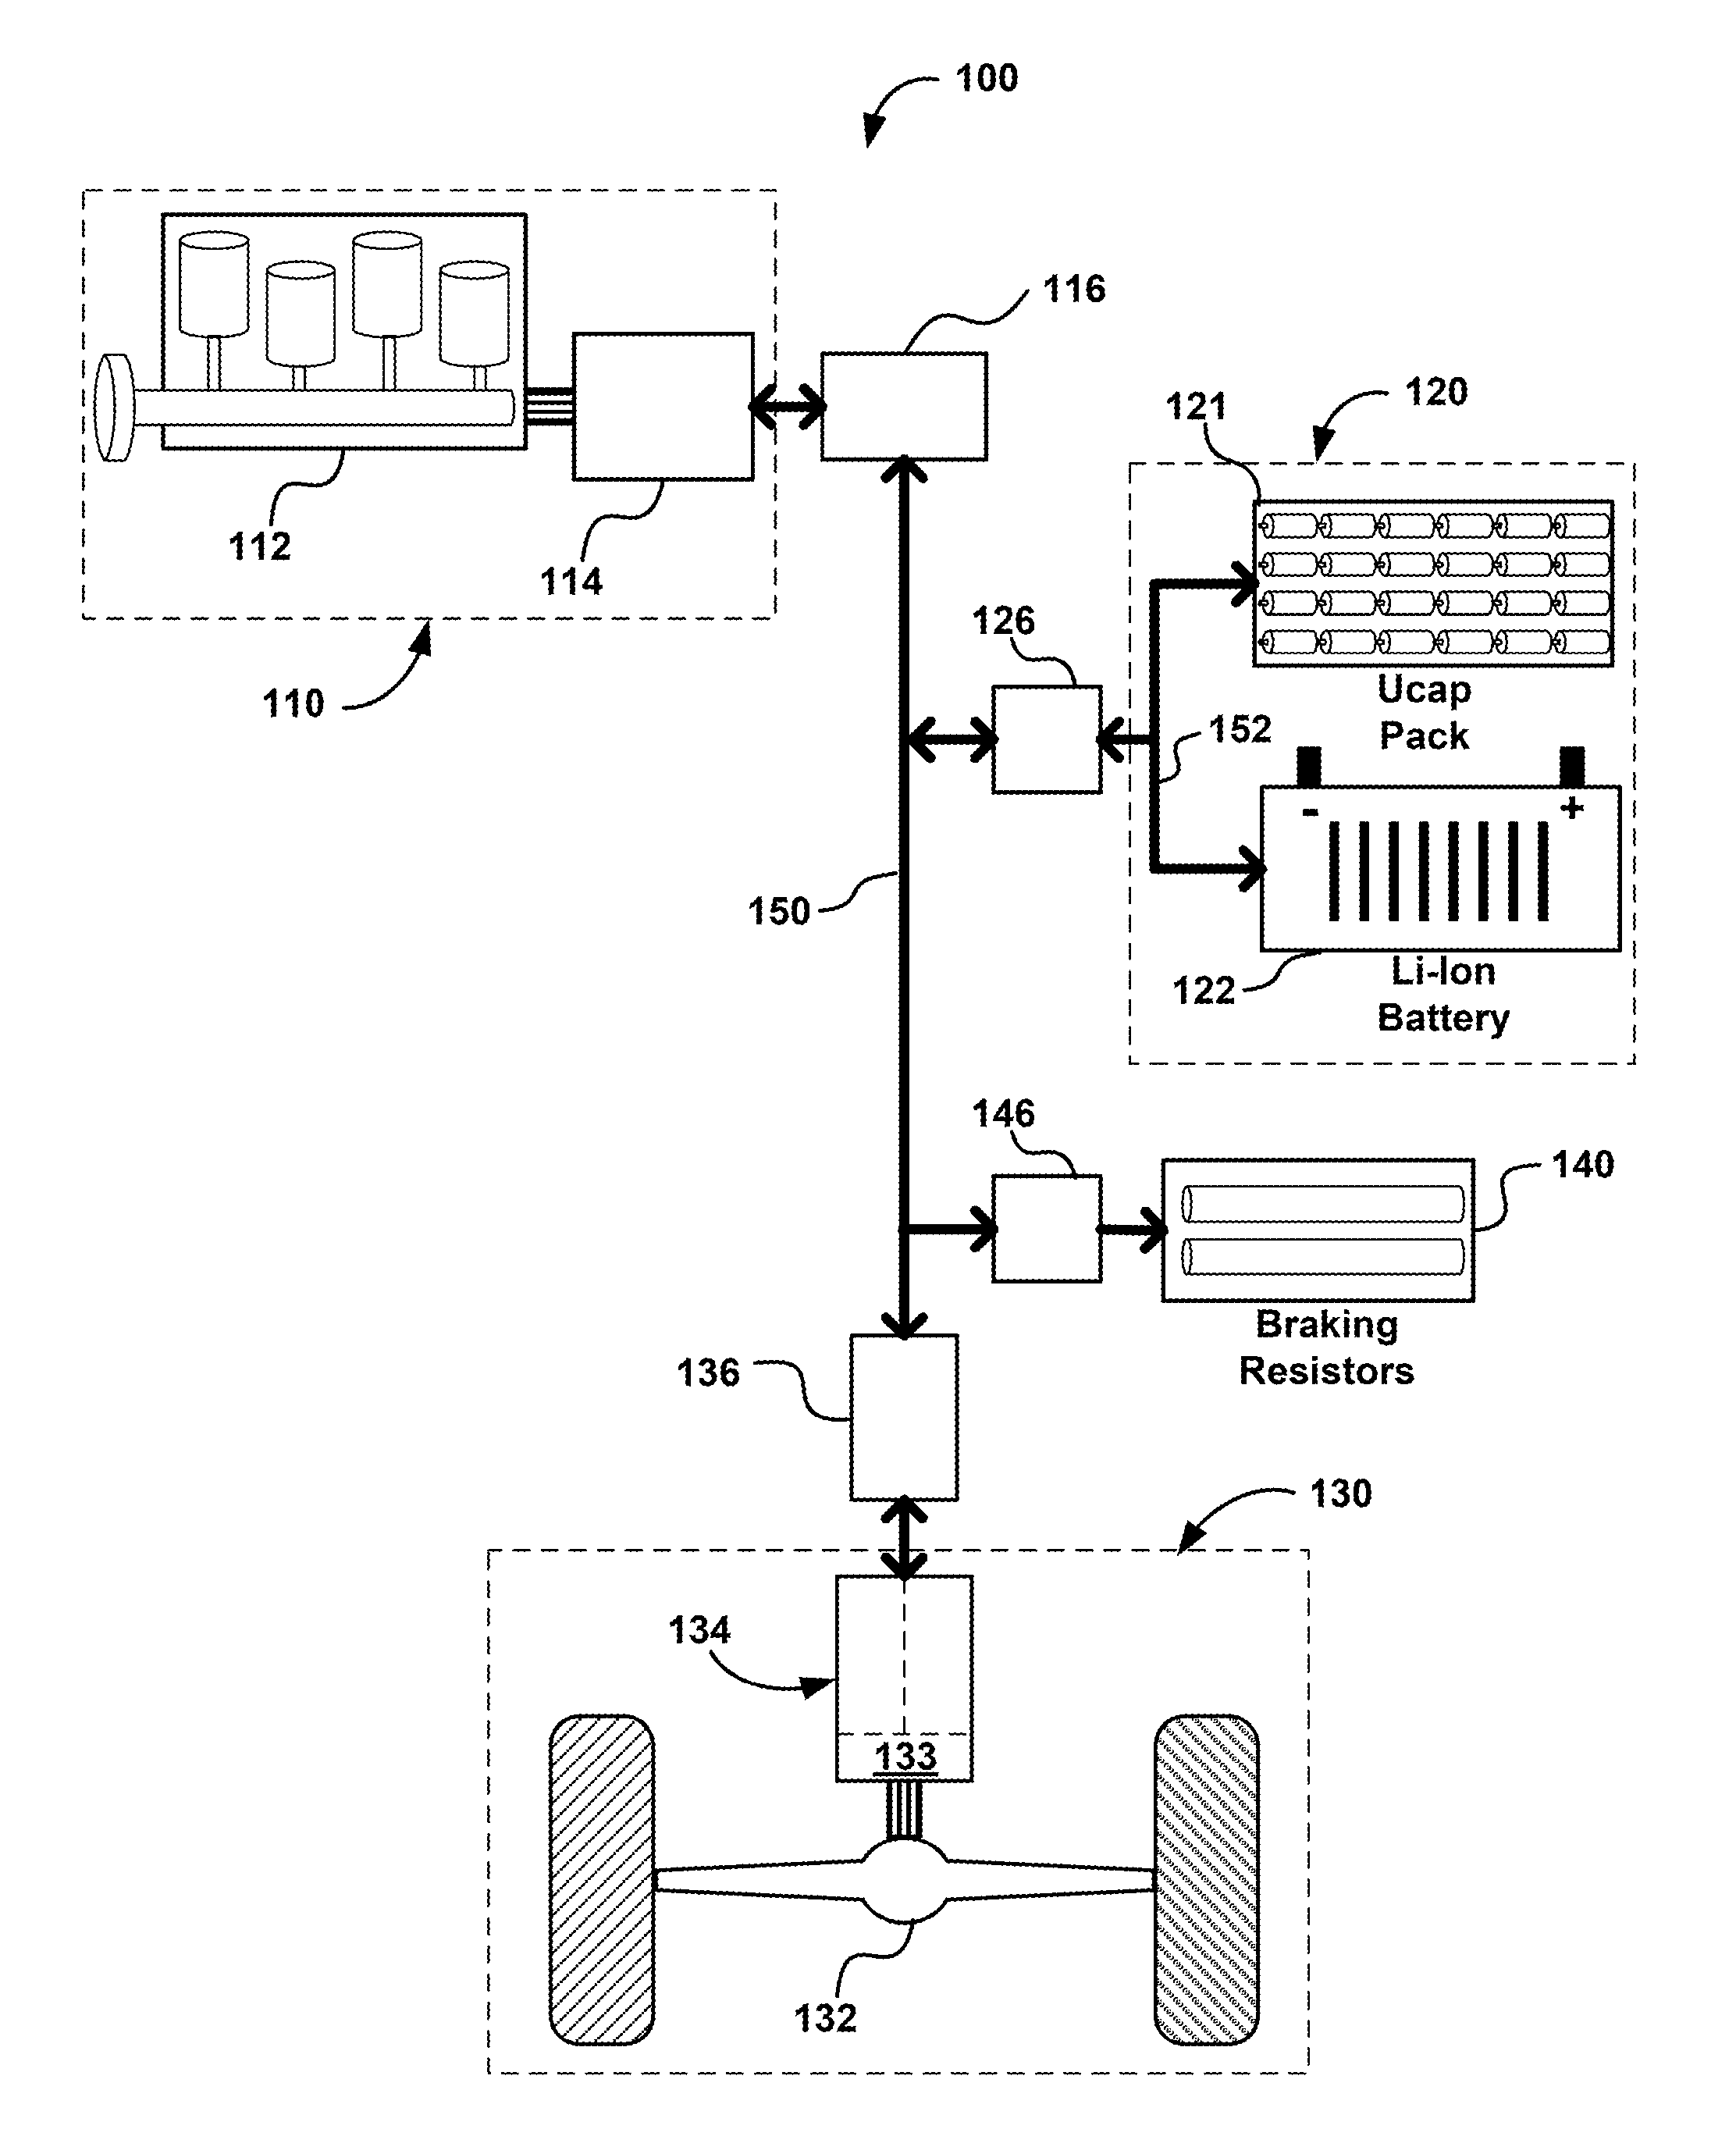 Expandable Energy Storage Control System Architecture